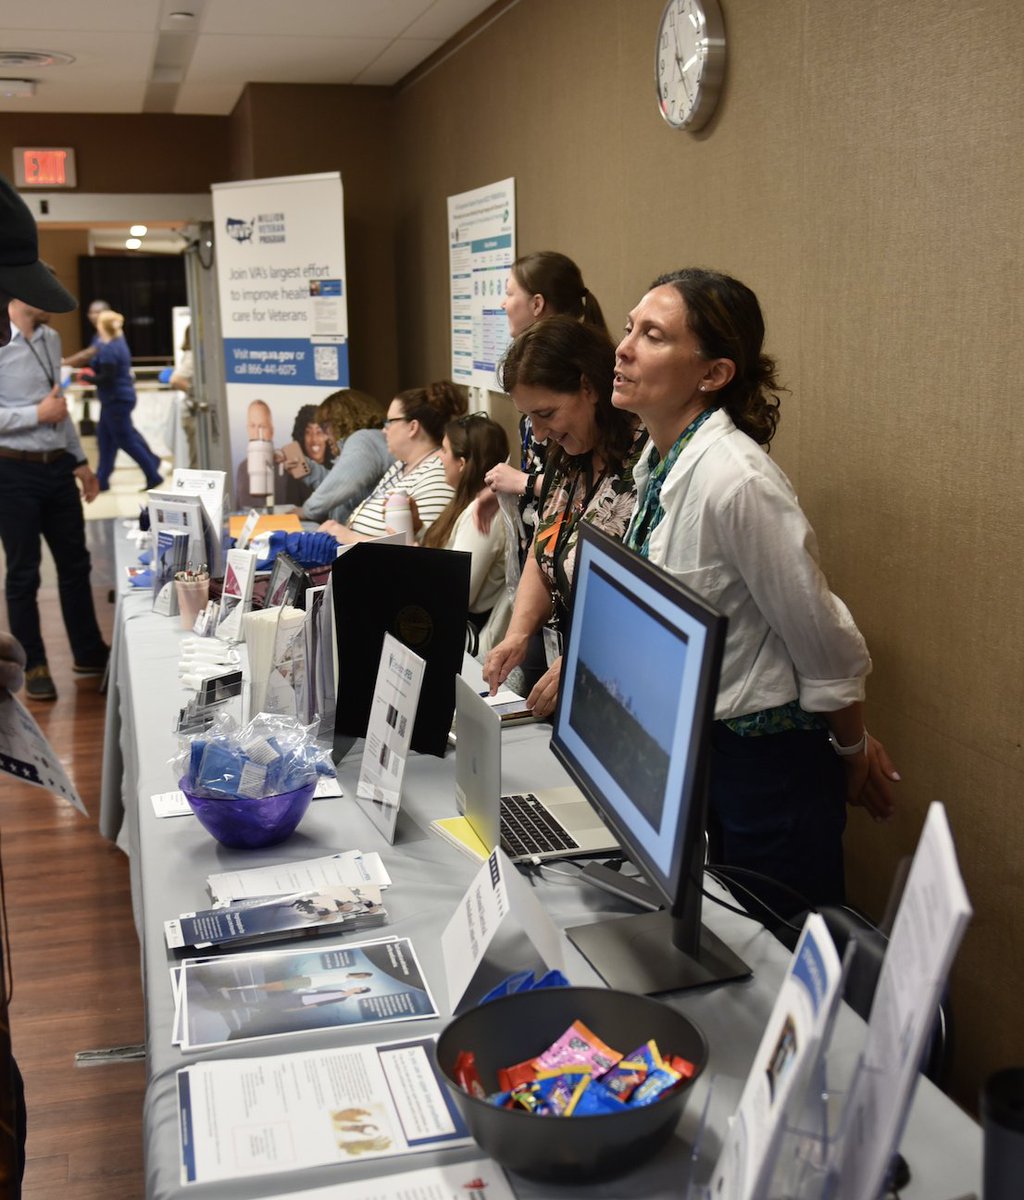 Tuesday was the Veteran Patient Experience Day Fair at @ClevelandVAMC and we were proud to host a table alongside the APT Center & Cleveland VA Research, sharing info about missions & current research. It was part of Veteran Patient Experience Week which continues through today.